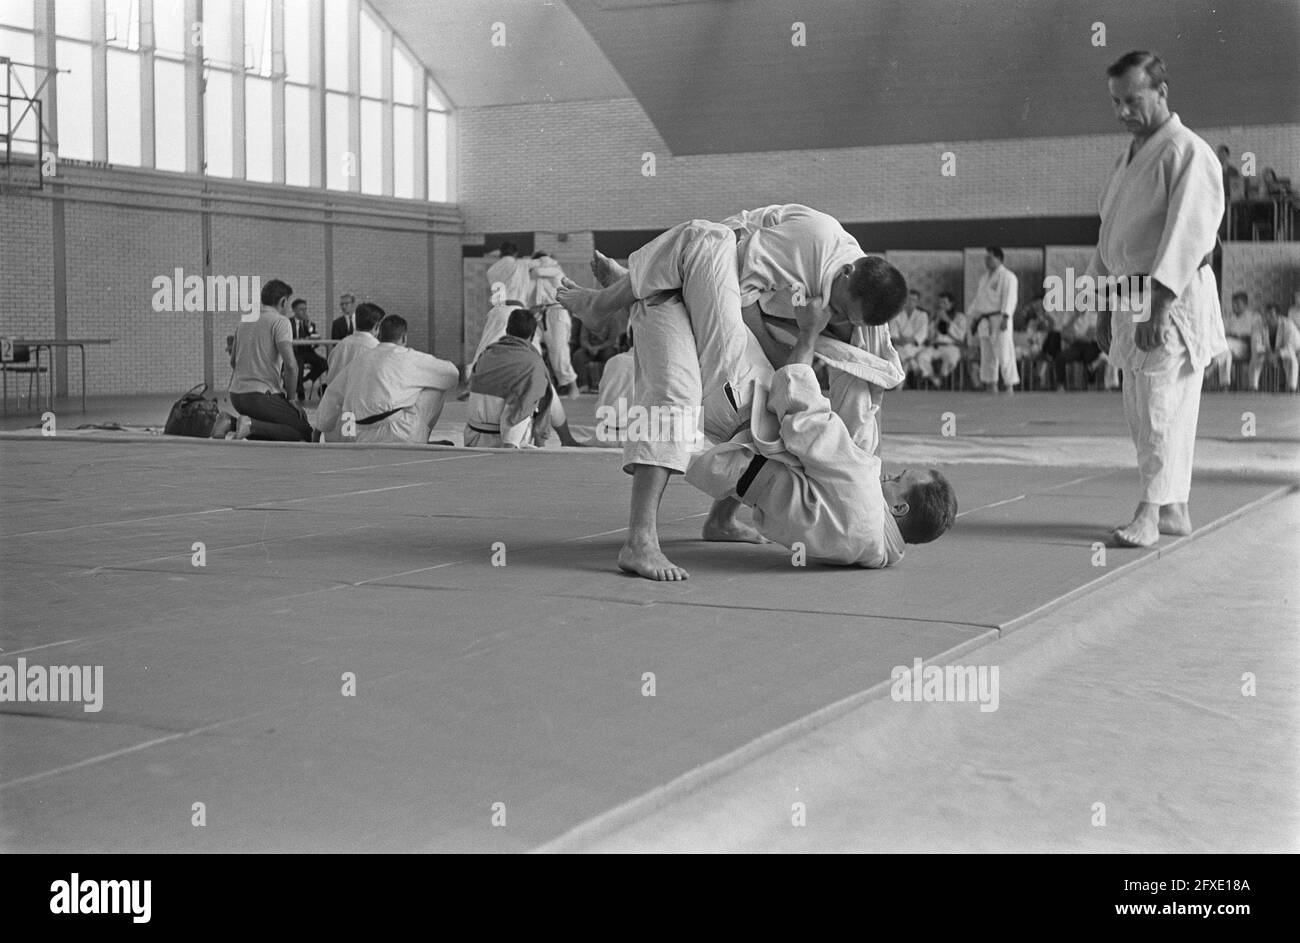 Students judo for European title in Delft, overview from team competitions, July 2, 1964, JUDO, STUDENTS, TITELS, overviews, The Netherlands, 20th century press agency photo, news to remember, documentary, historic photography 1945-1990, visual stories, human history of the Twentieth Century, capturing moments in time Stock Photo